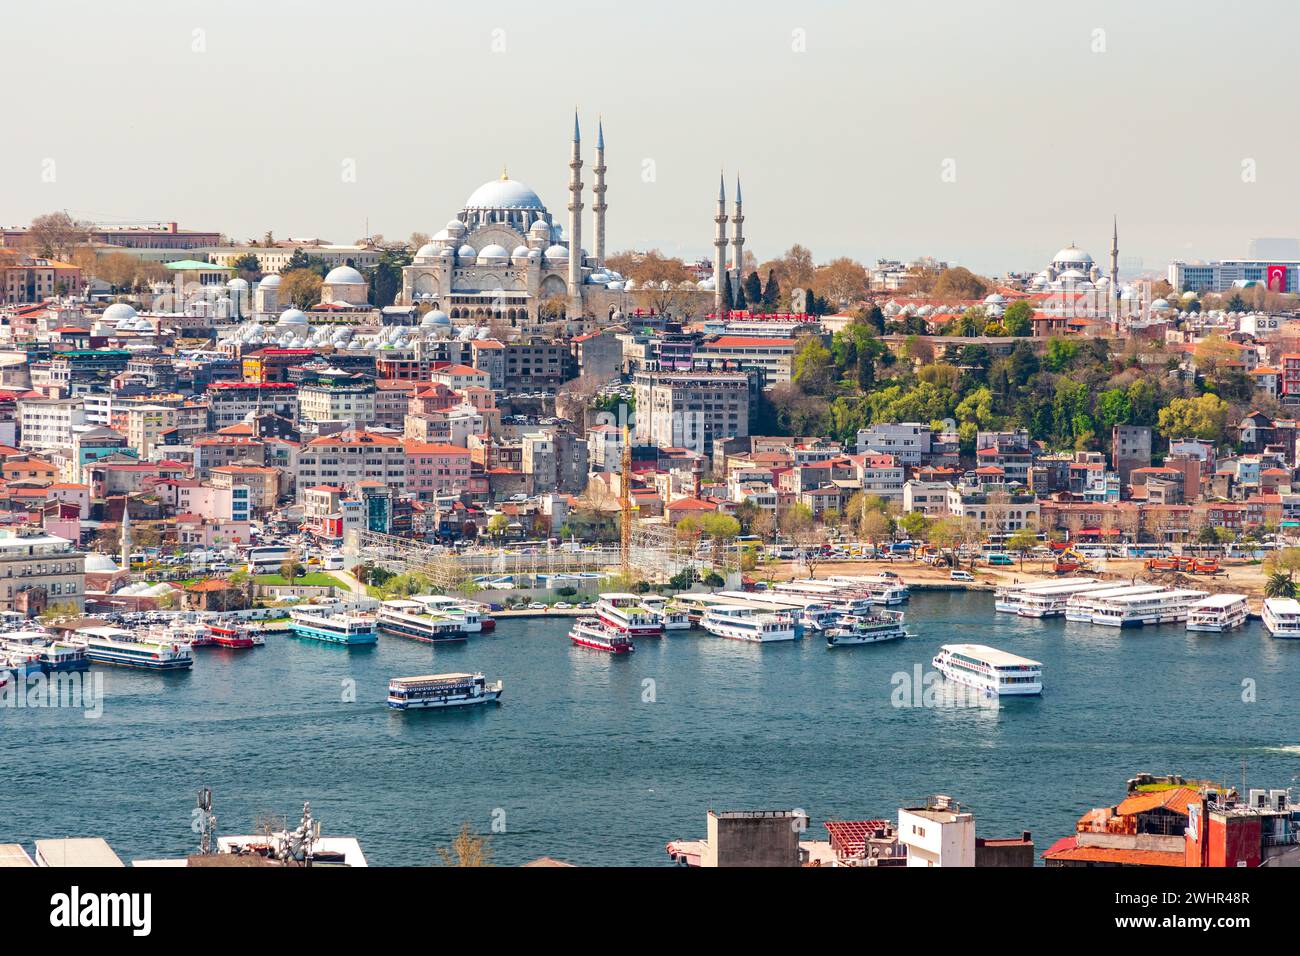 View on Suleymaniye Mosque in the European part of Istanbul, Turkey, Turkiye, panorama in sunny day. Colorful houses with red roofs. Stock Photo